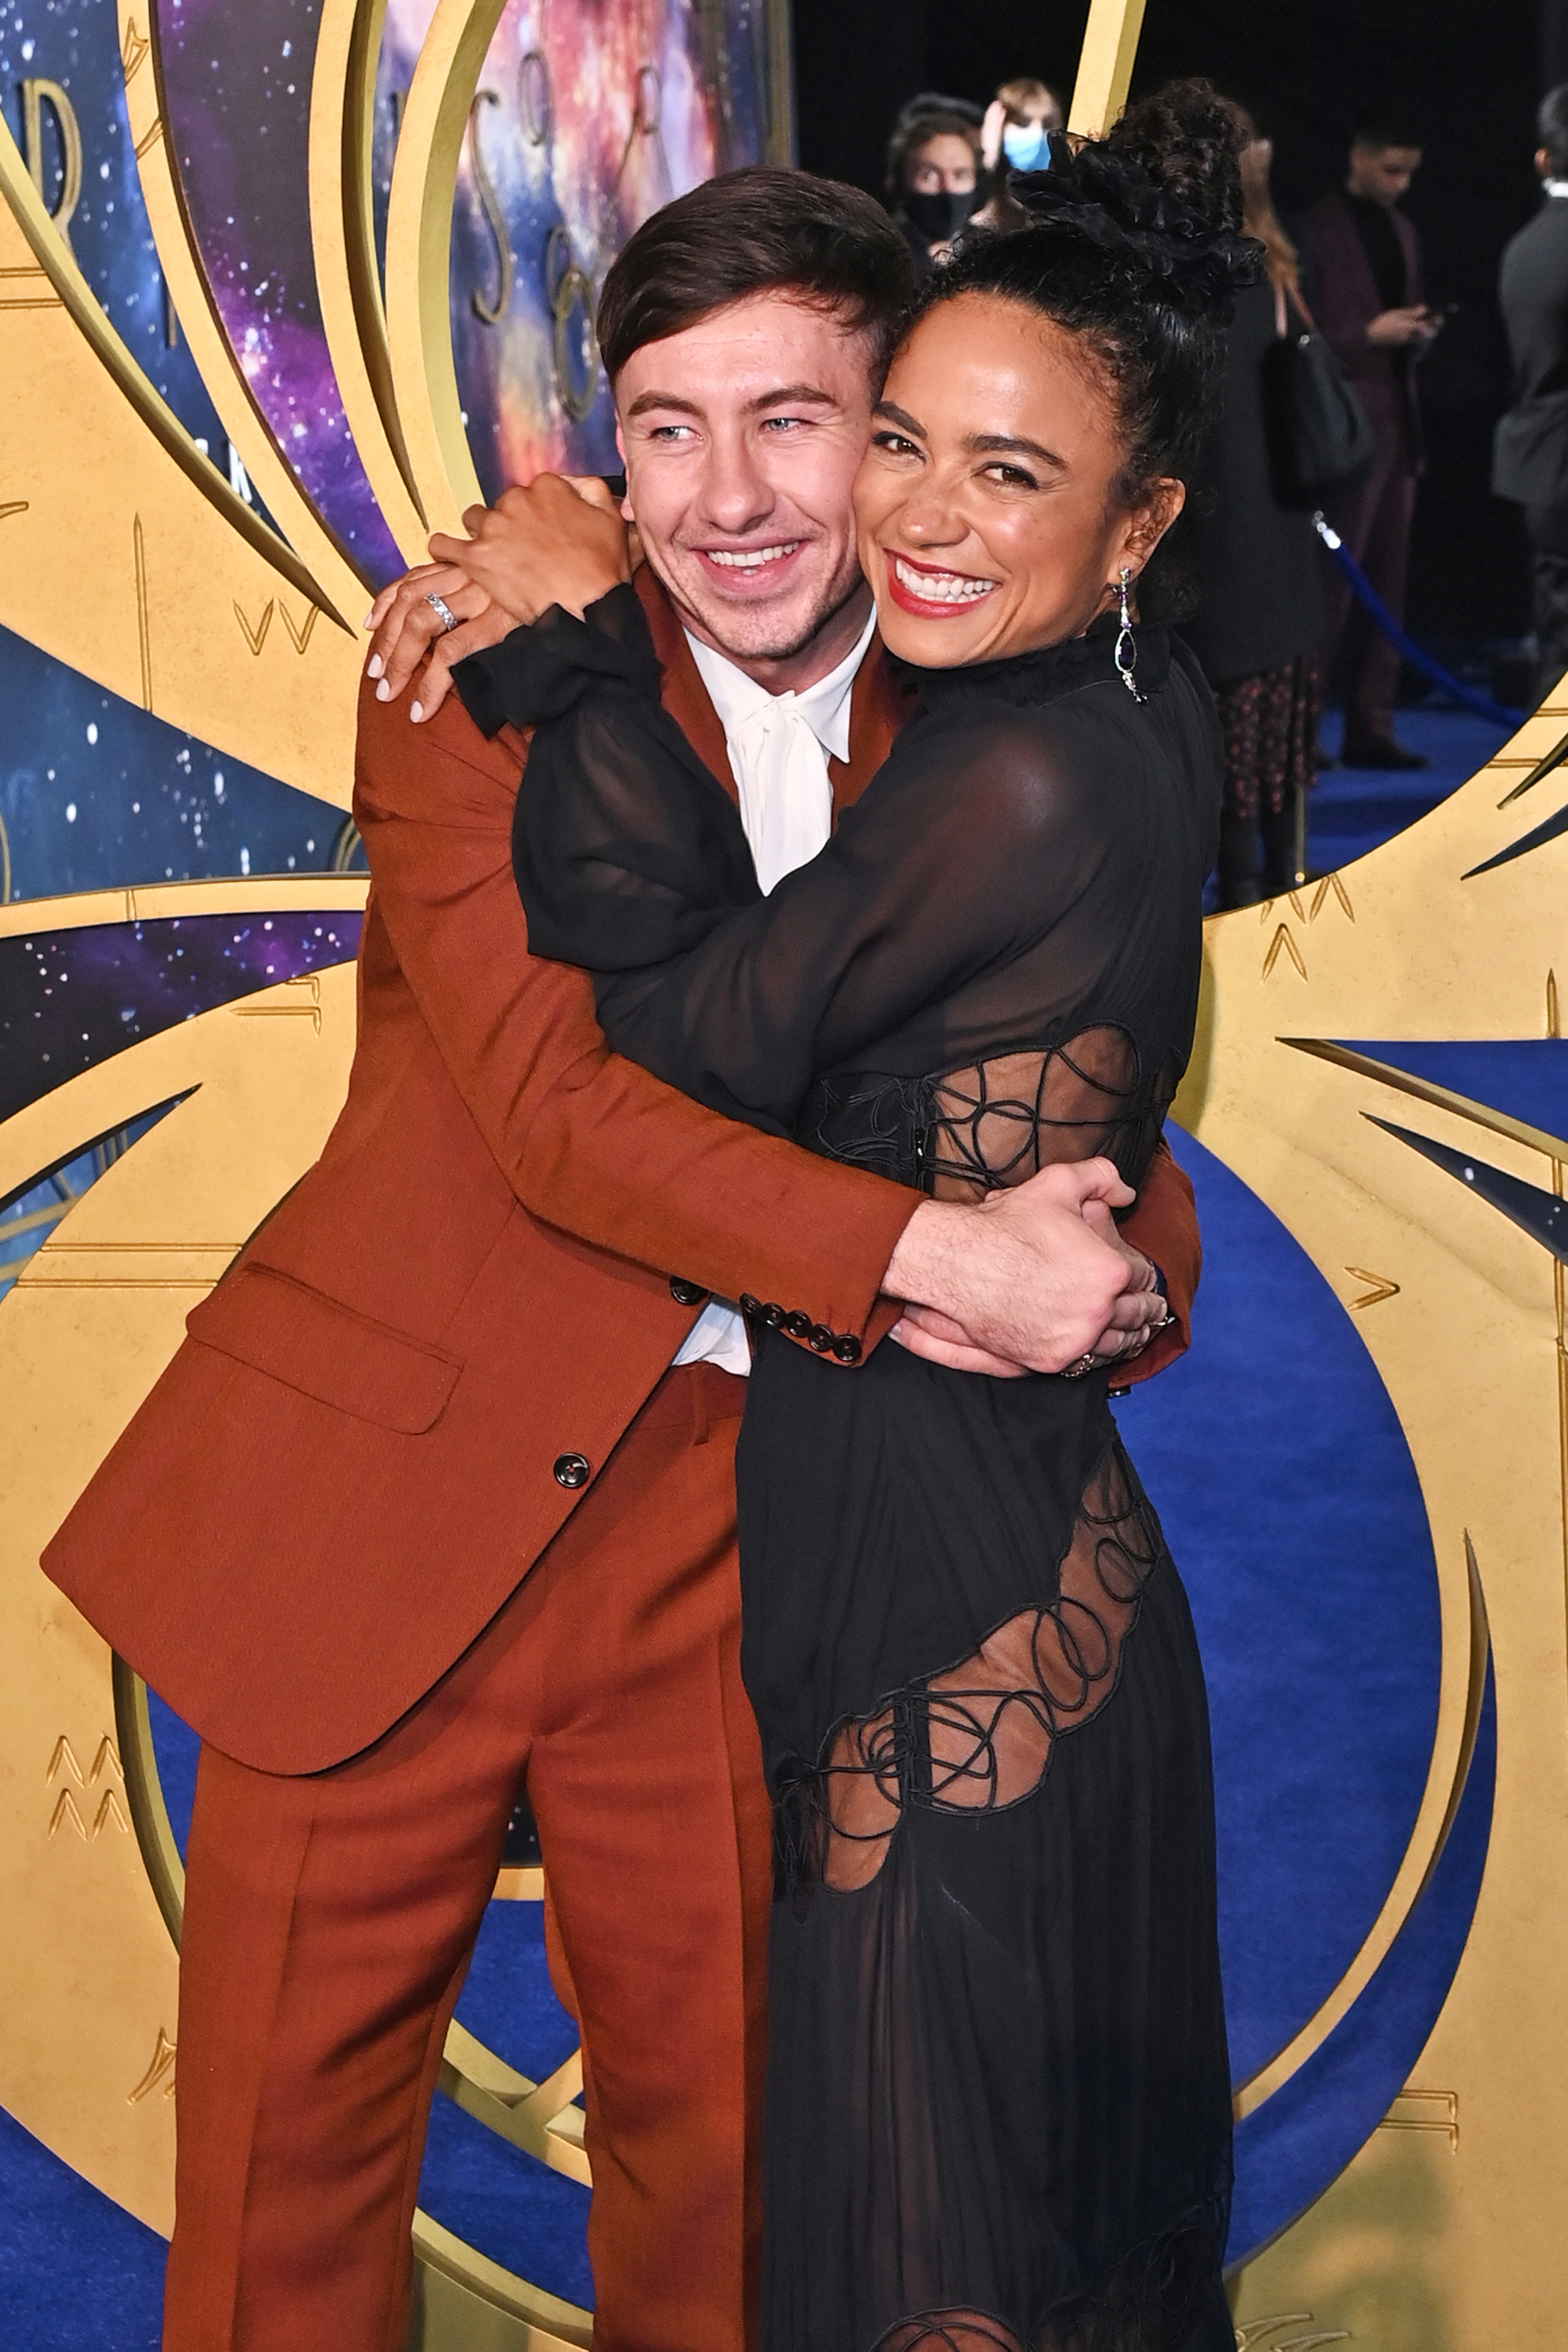 Barry and Lauren hugging on a red carpet